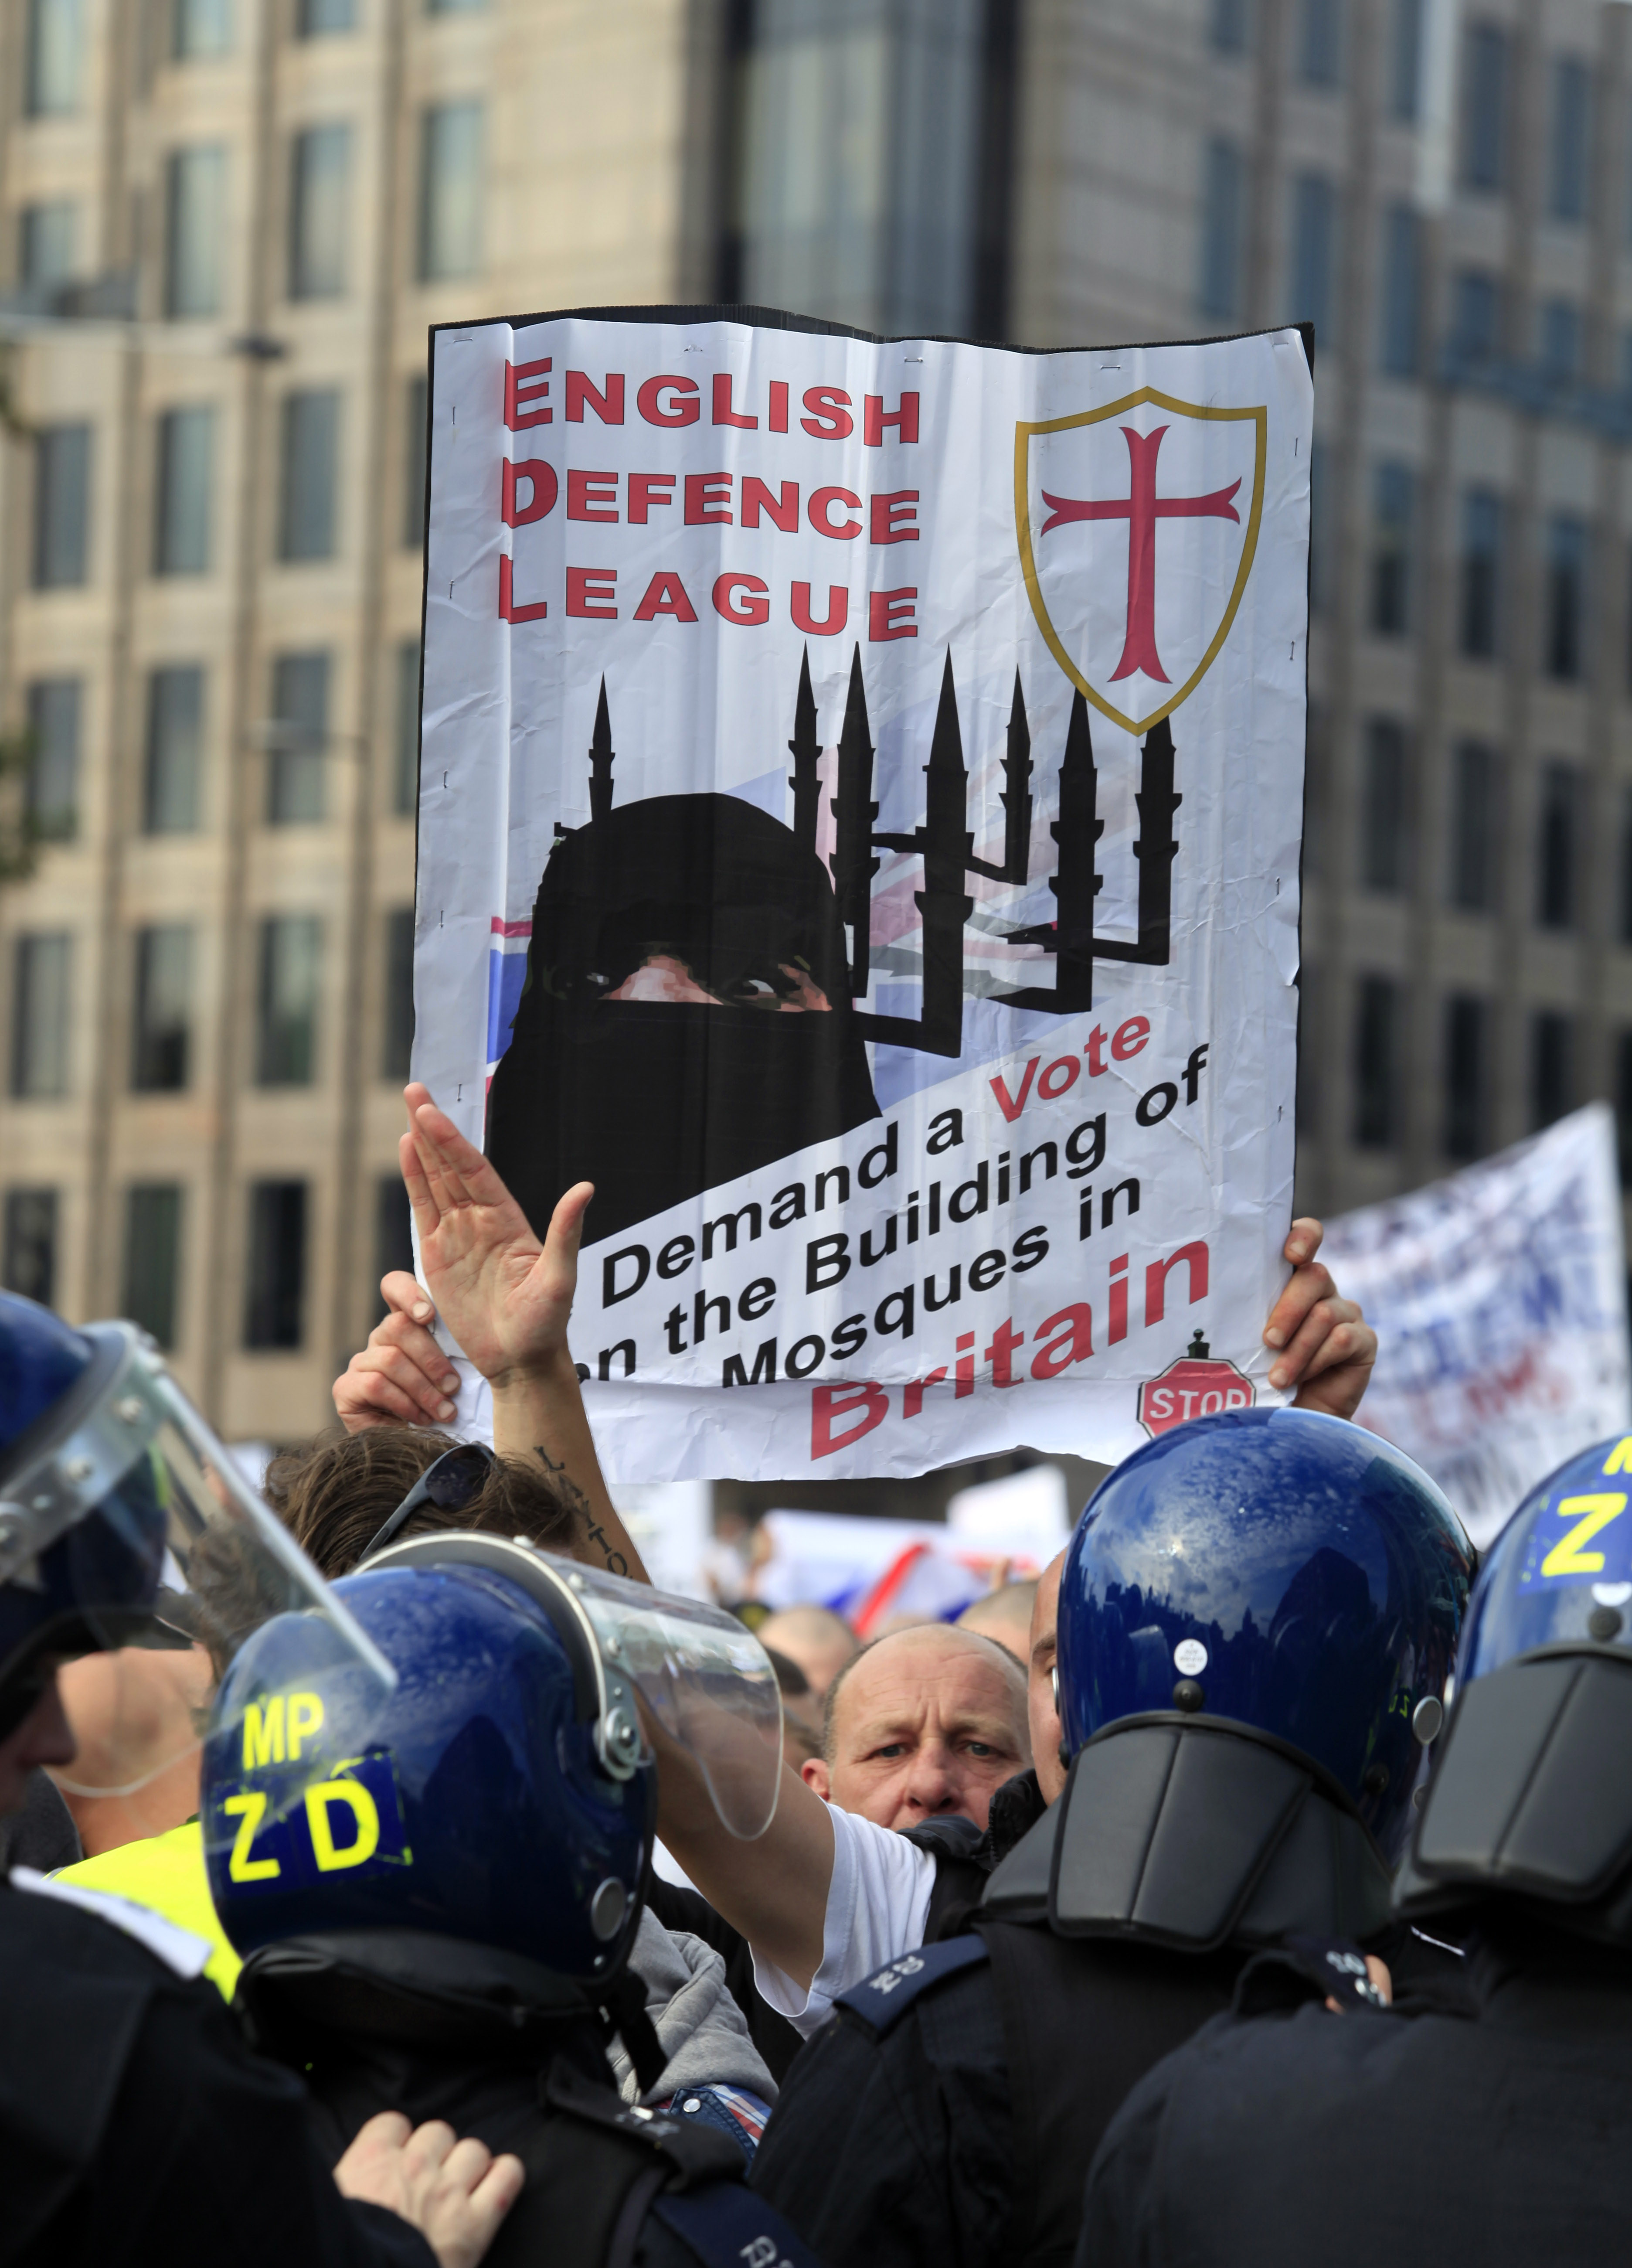 Swedish Defence League, Muslimer, Demonstration, Högerextrema, English Defence League, Protester